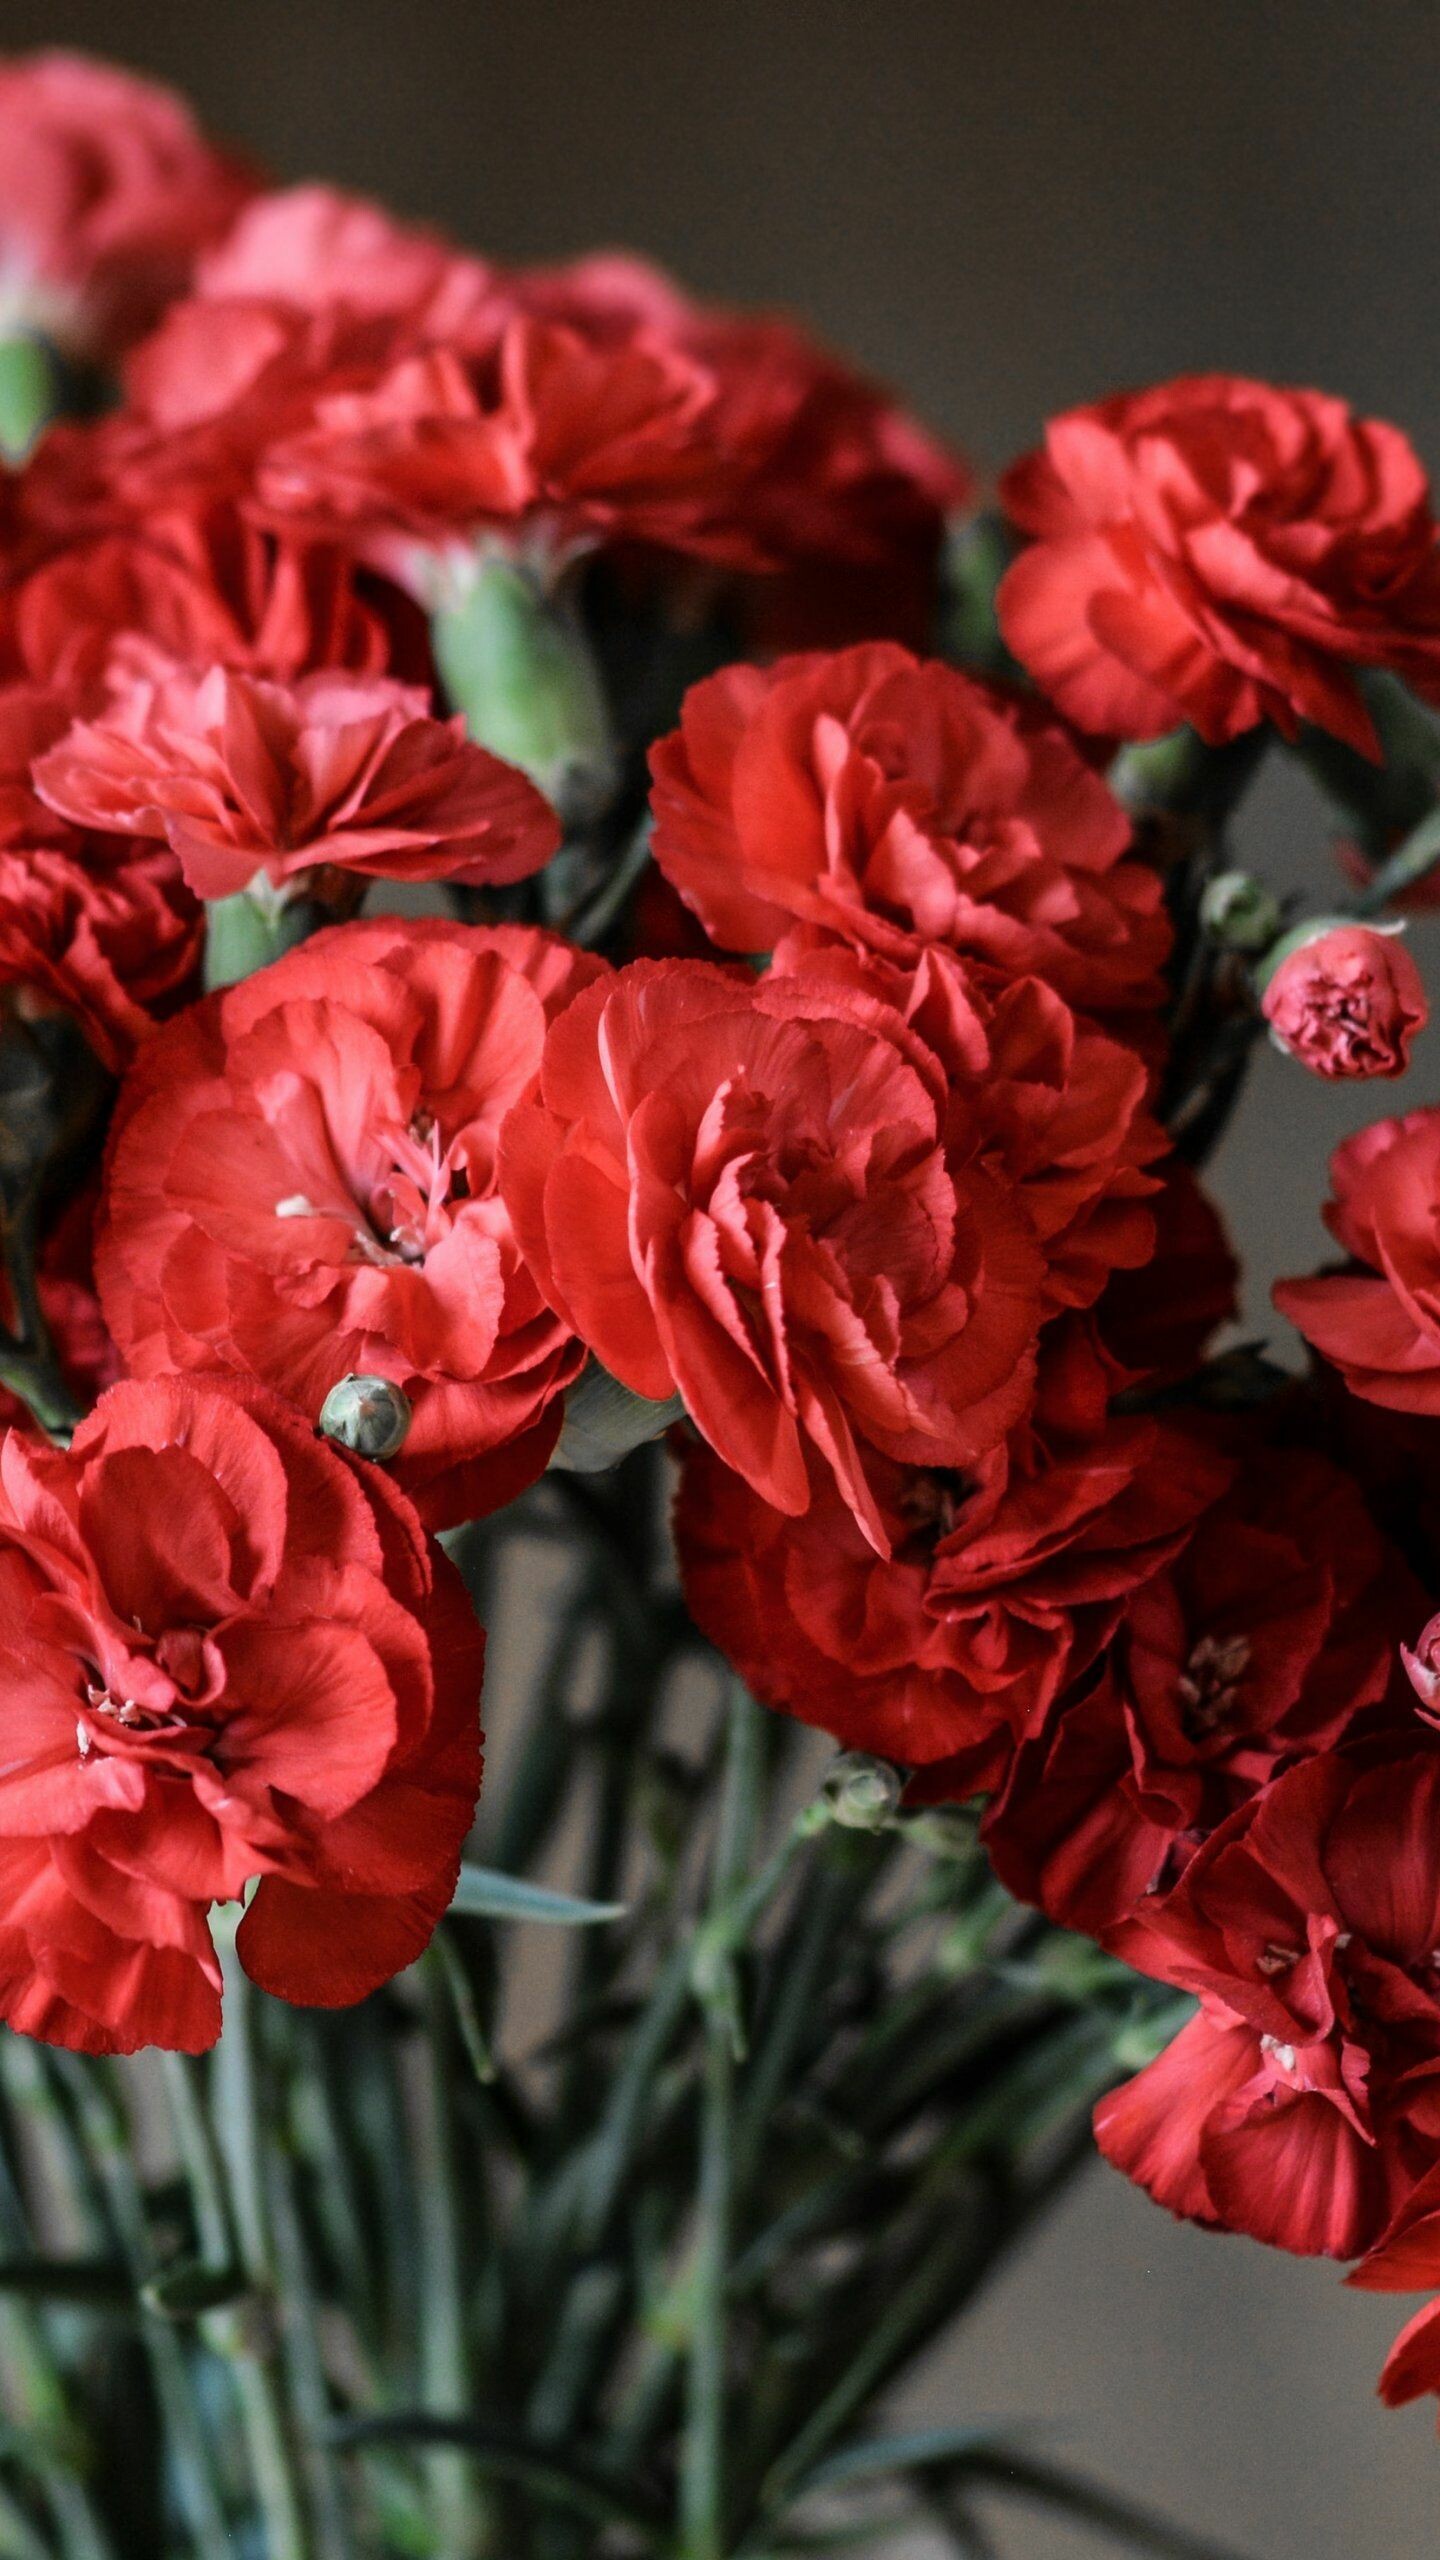 Carnation: Red carnations are worn on May Day as a symbol of socialism and the labor movement in some countries, such as Austria, Italy, and successor countries of the former Yugoslavia. 1440x2560 HD Wallpaper.